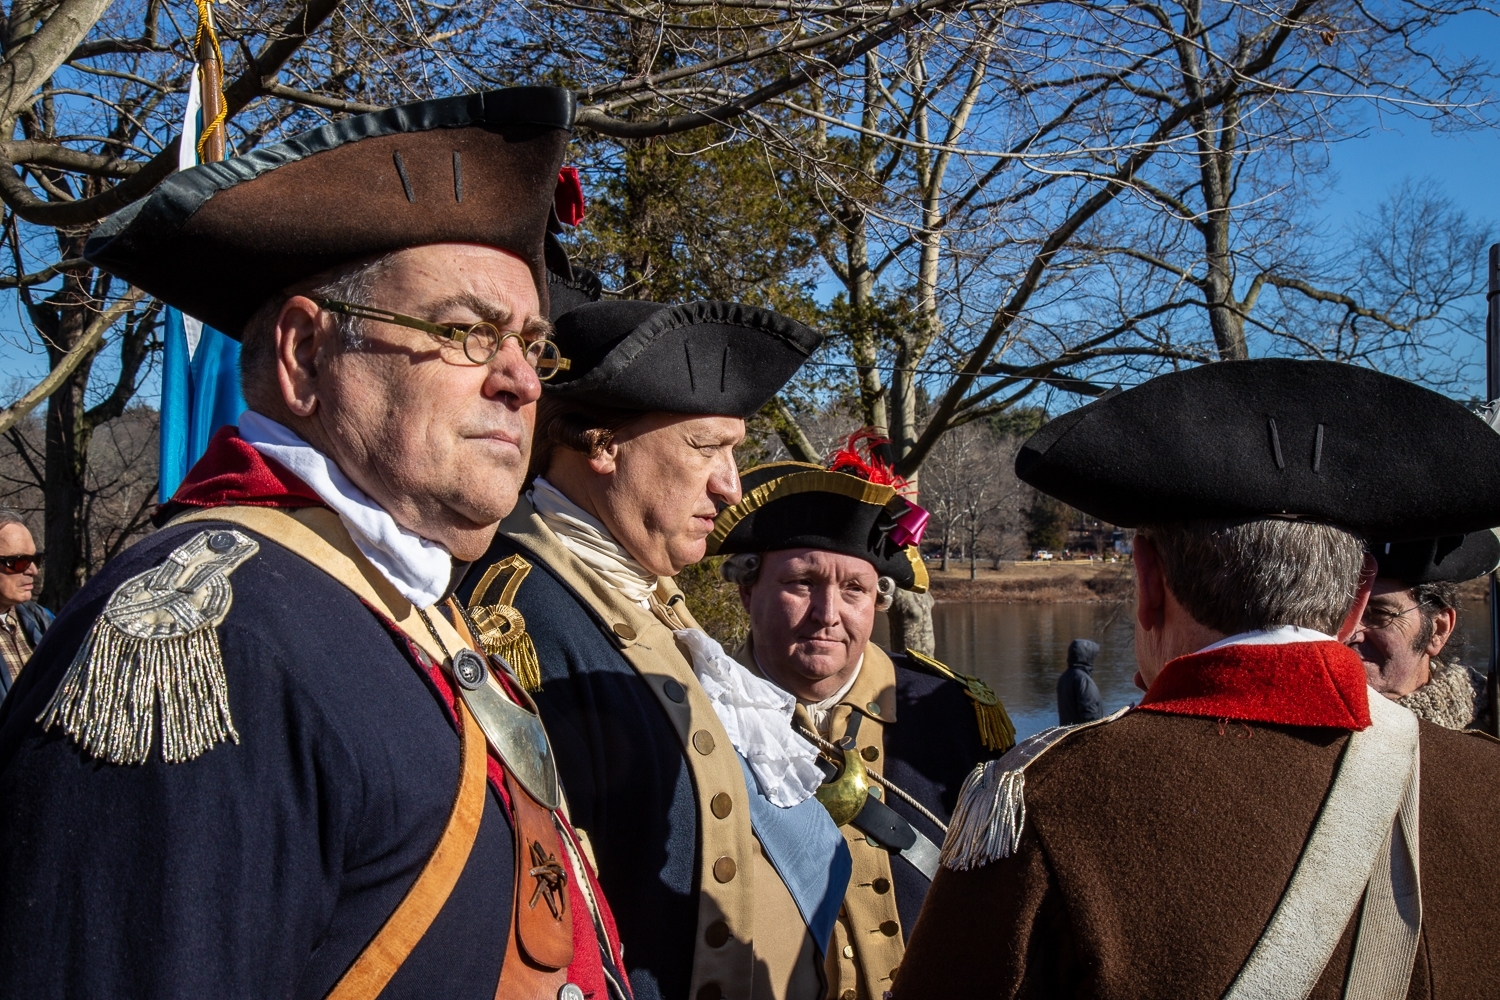 Washington Crossing, PA, USA - December 25, 2016: A renenactor portraying General George Washington speaks with other reenactors before crossing the Delaware River.